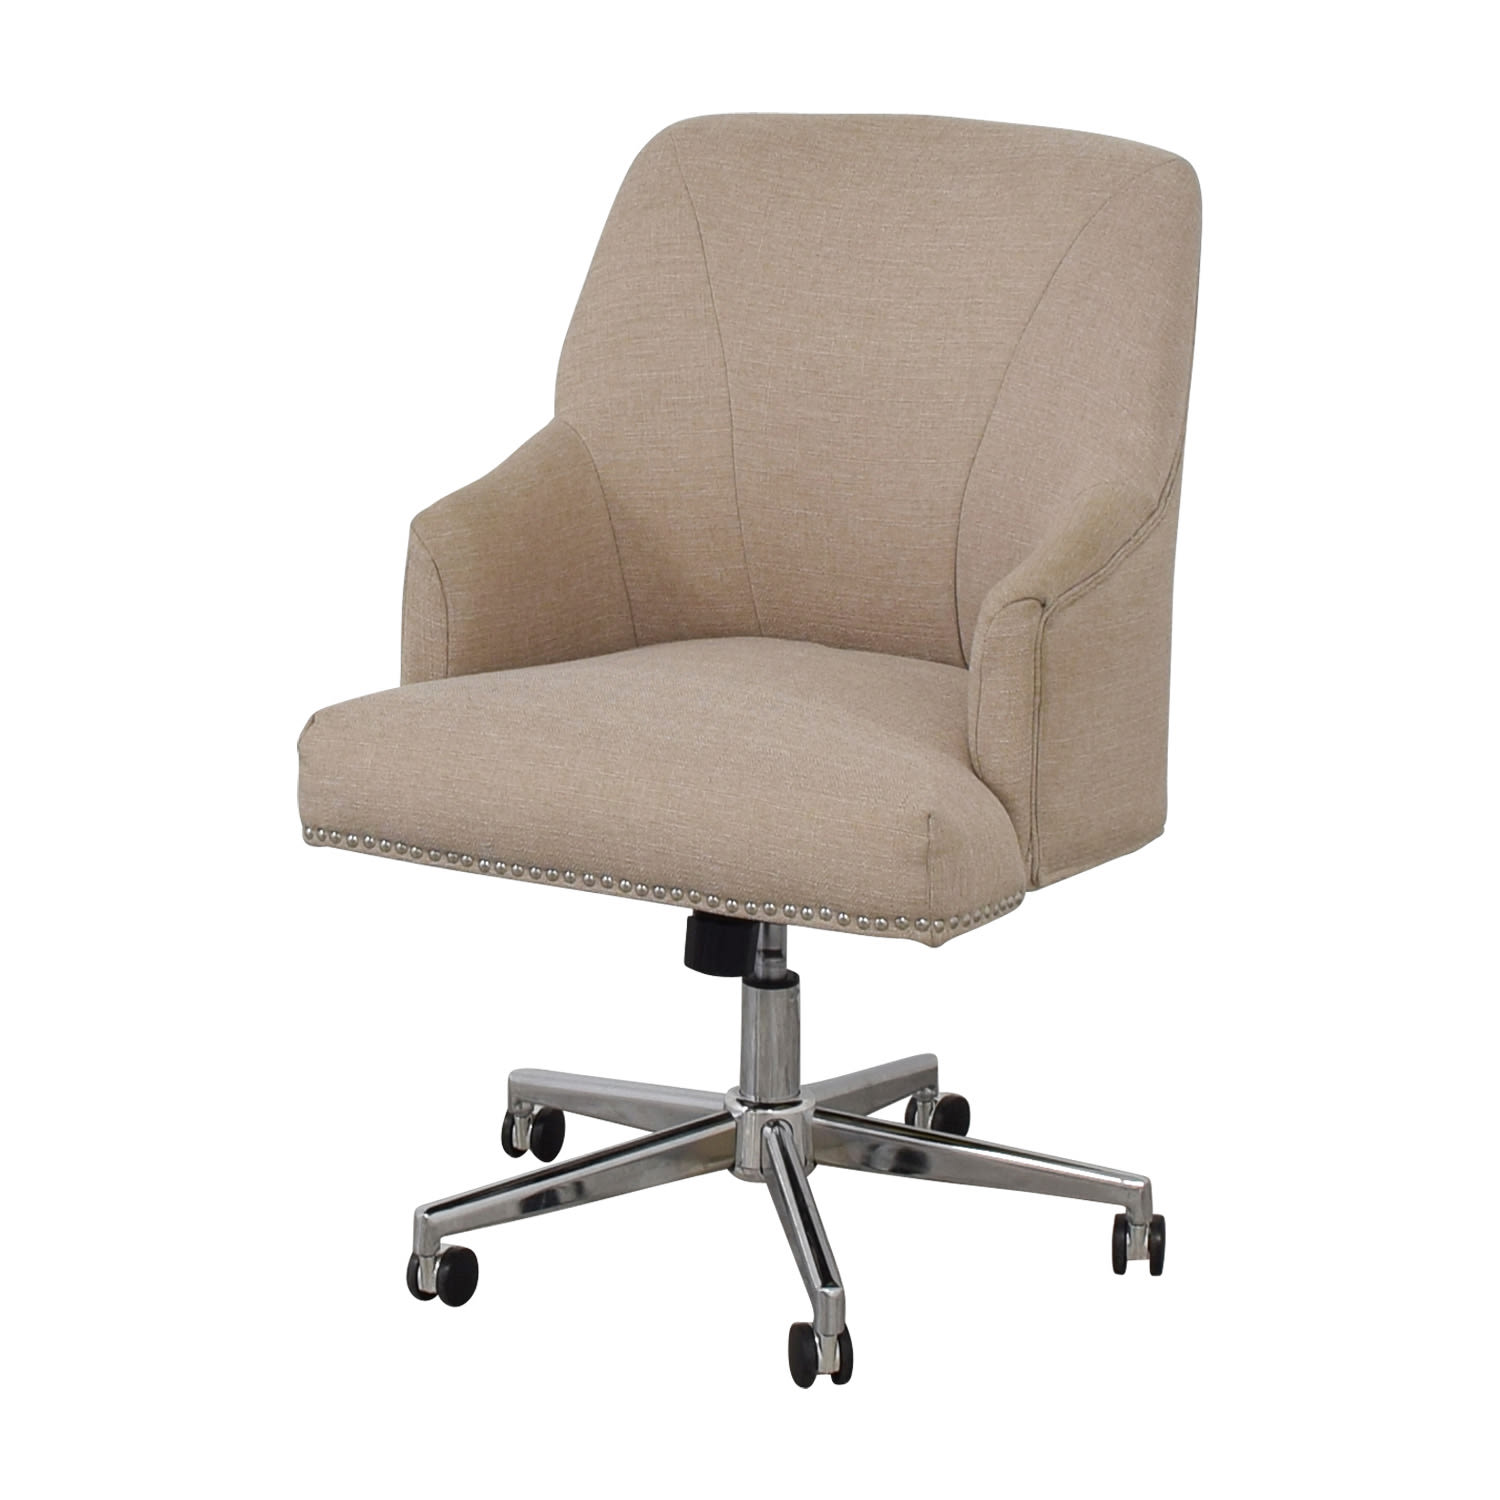 Serta Office Chair Home Office Furniture